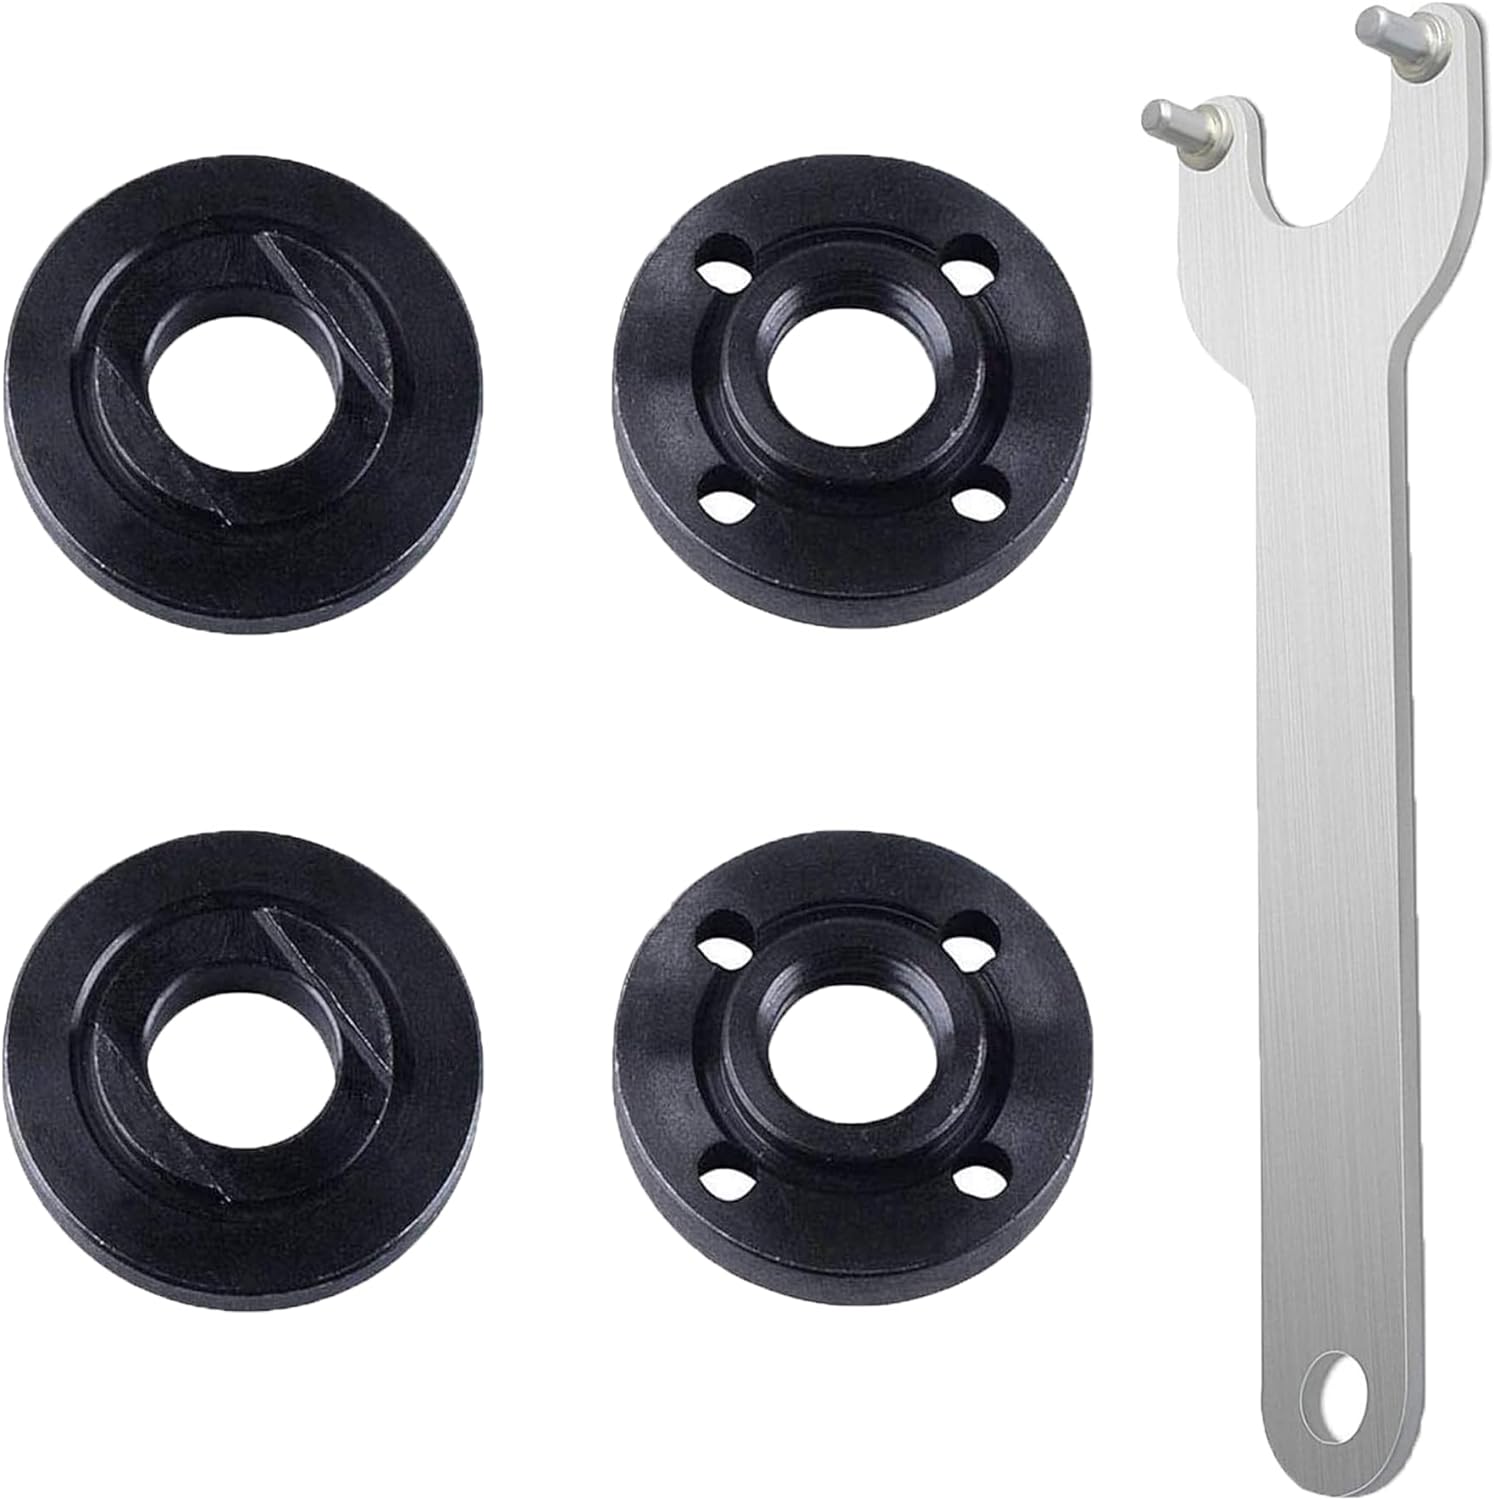 JonPhoe 5PCS Angle Grinder Flange Nut 5/8-11 with Spanner ​Wrench, Metal Lock Nuts for 4-1/2 and 5 Angle Grinder Compatible with Makita Dewalt Metabo Bosch Ryobi Black Decker (5)